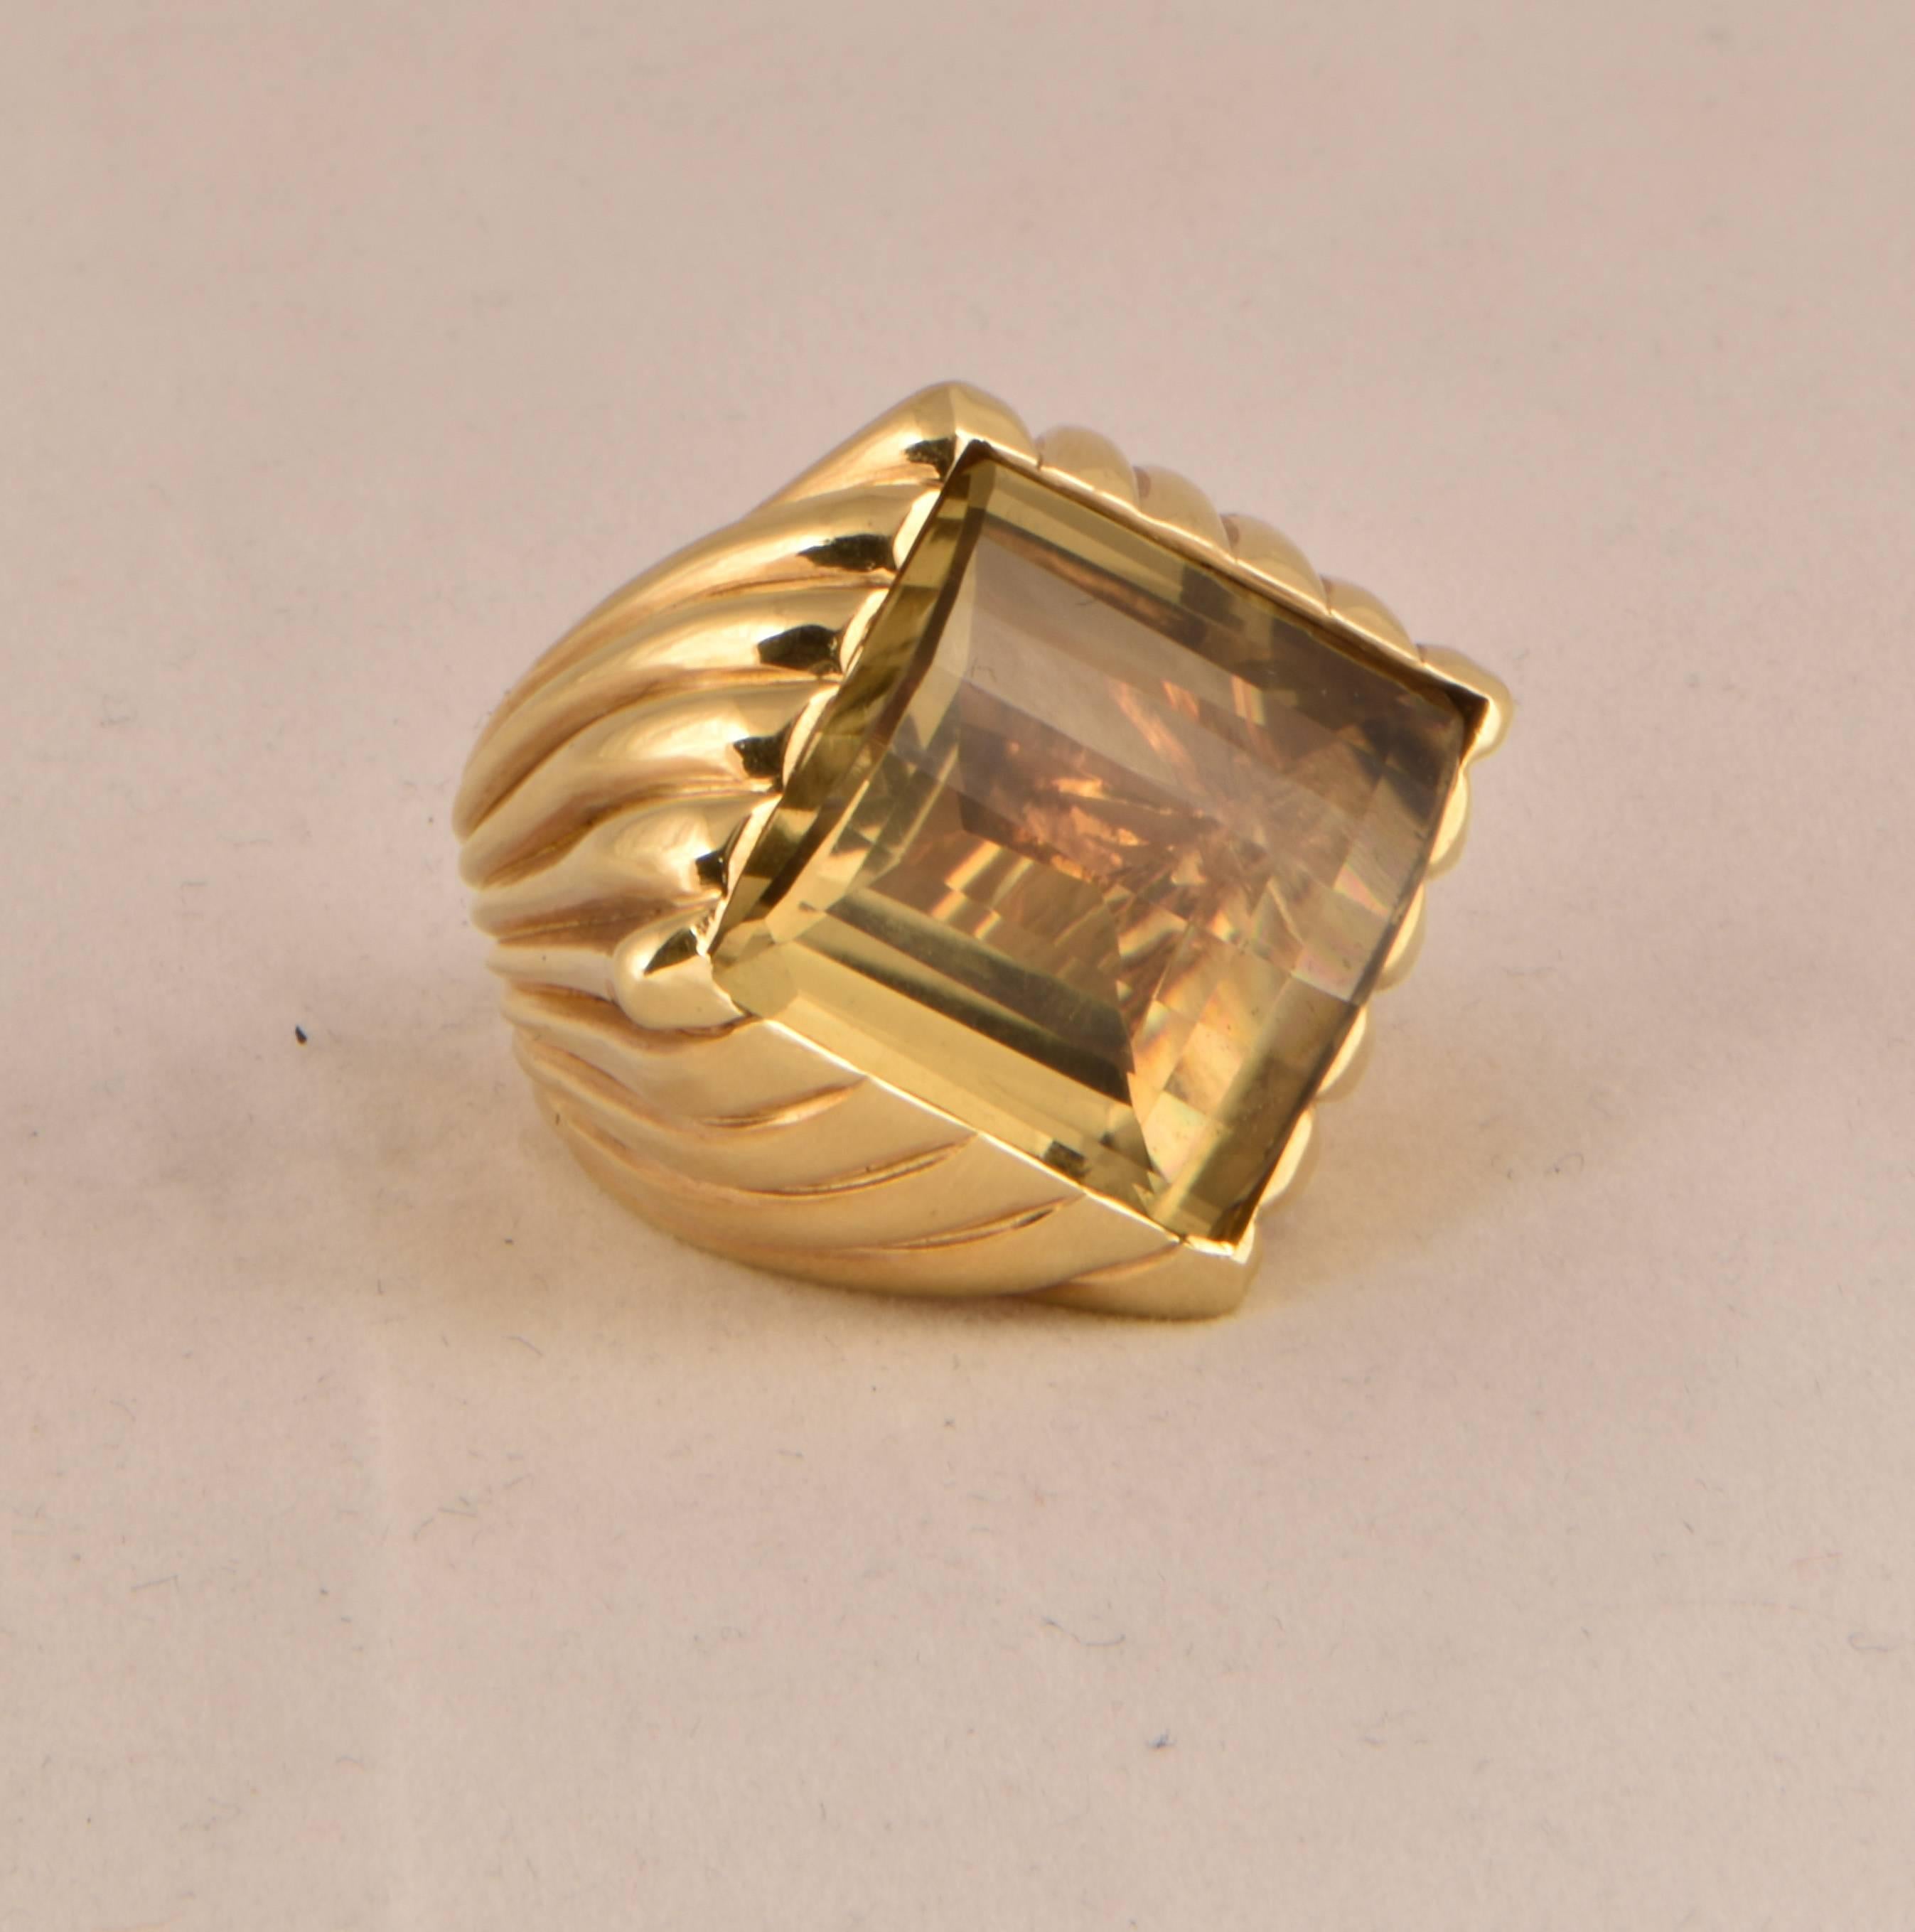 Impressive Chunky 18k Gold Ring set with a Square Citrine (app. 32.20ct.) by Tony Duquette, Designer Extraordinaire! Ring size 6; measures approx. across finger x 1.25